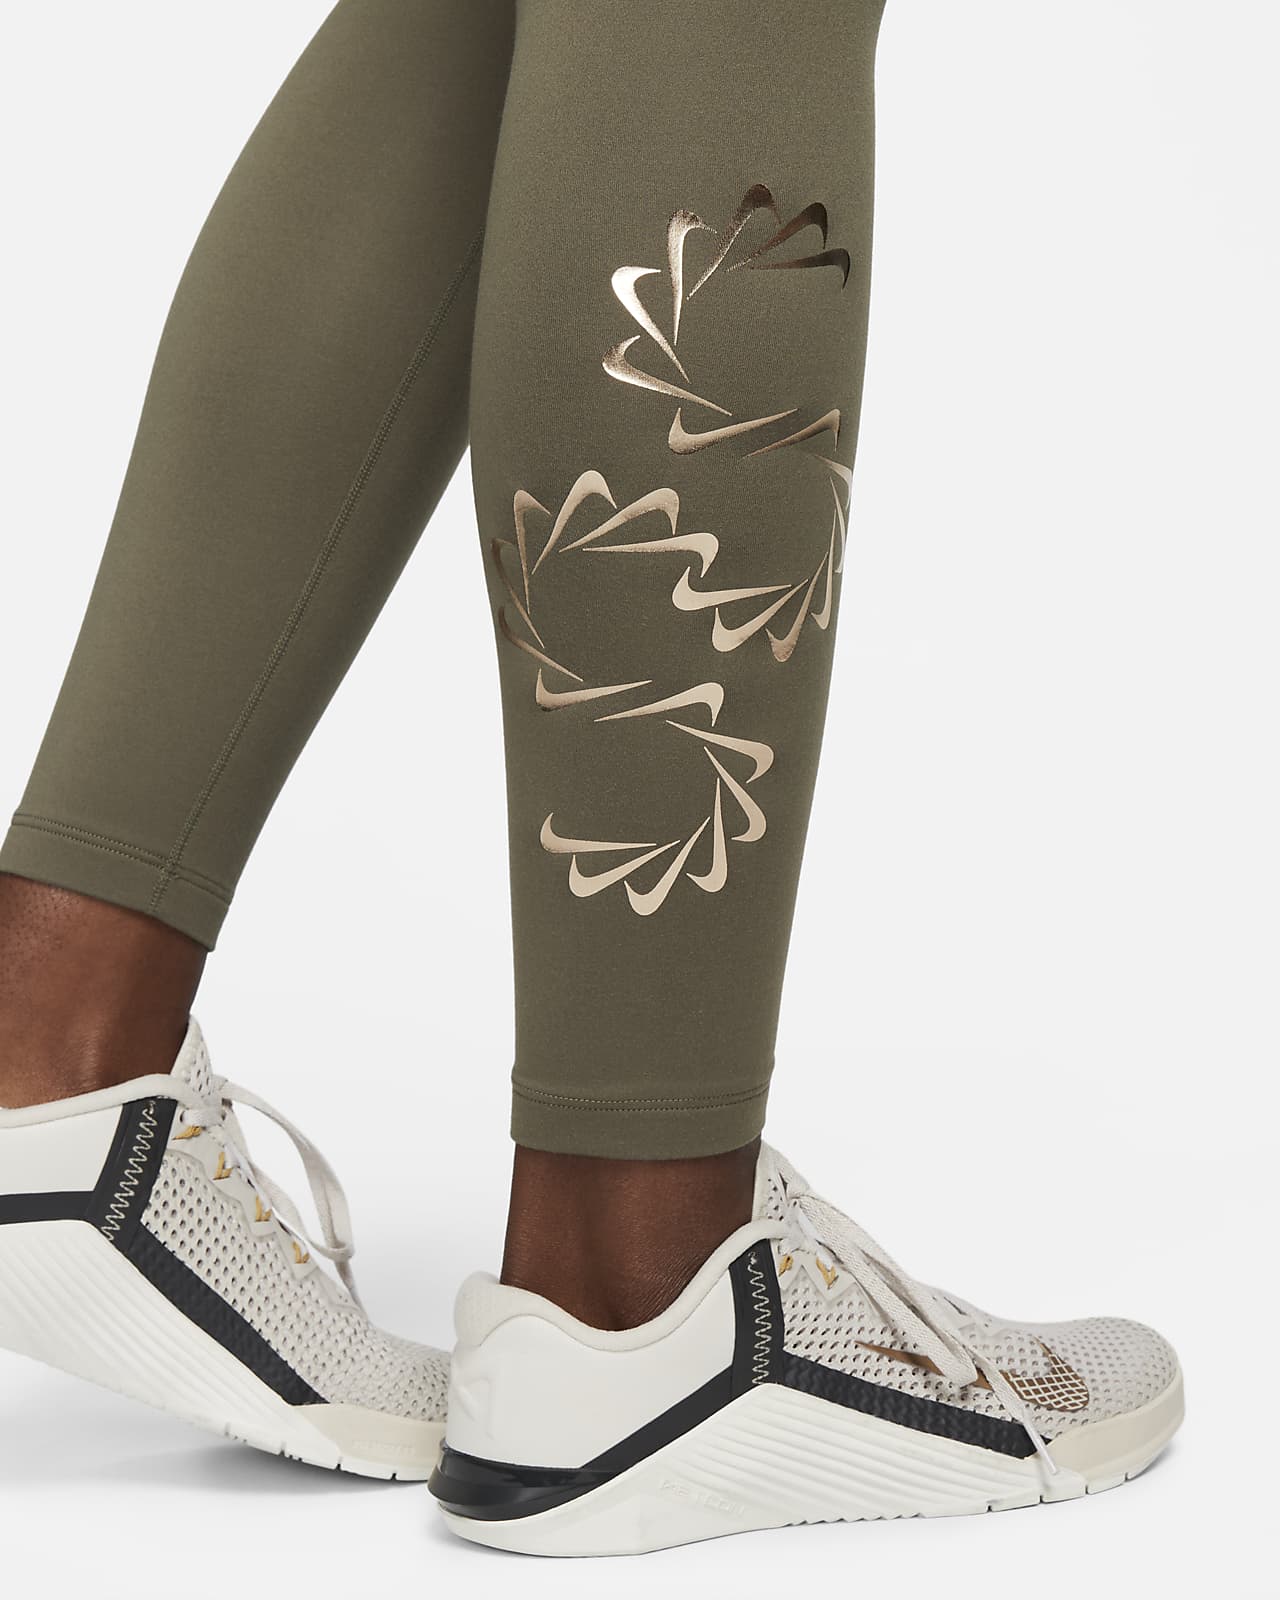 Nike Therma-FIT One Leggings W   all about sports